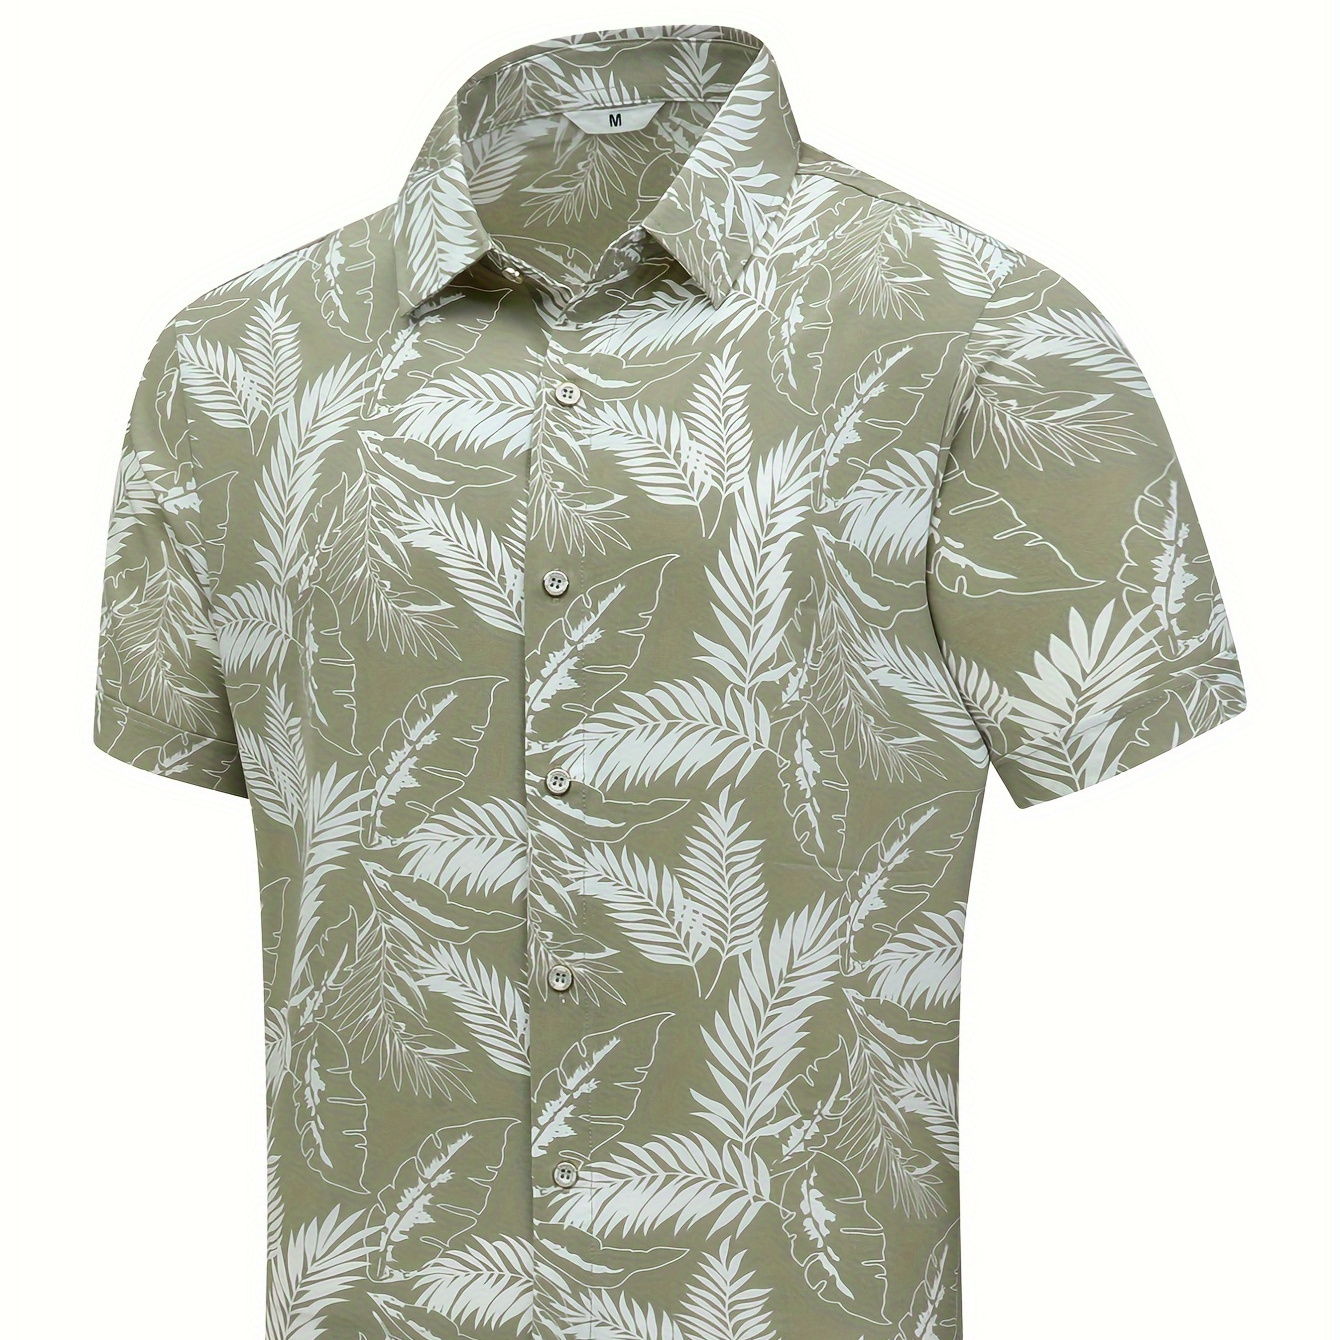 

Army Green Background Leaves, Hawaiian Men's Shirt, Unisex Summer Beach Leisure Vacation Short Sleeved Button Up Half Sleeved 5 Quarter Sleeved Shirt, Printed Tropical Plant Feather Leaves Daily